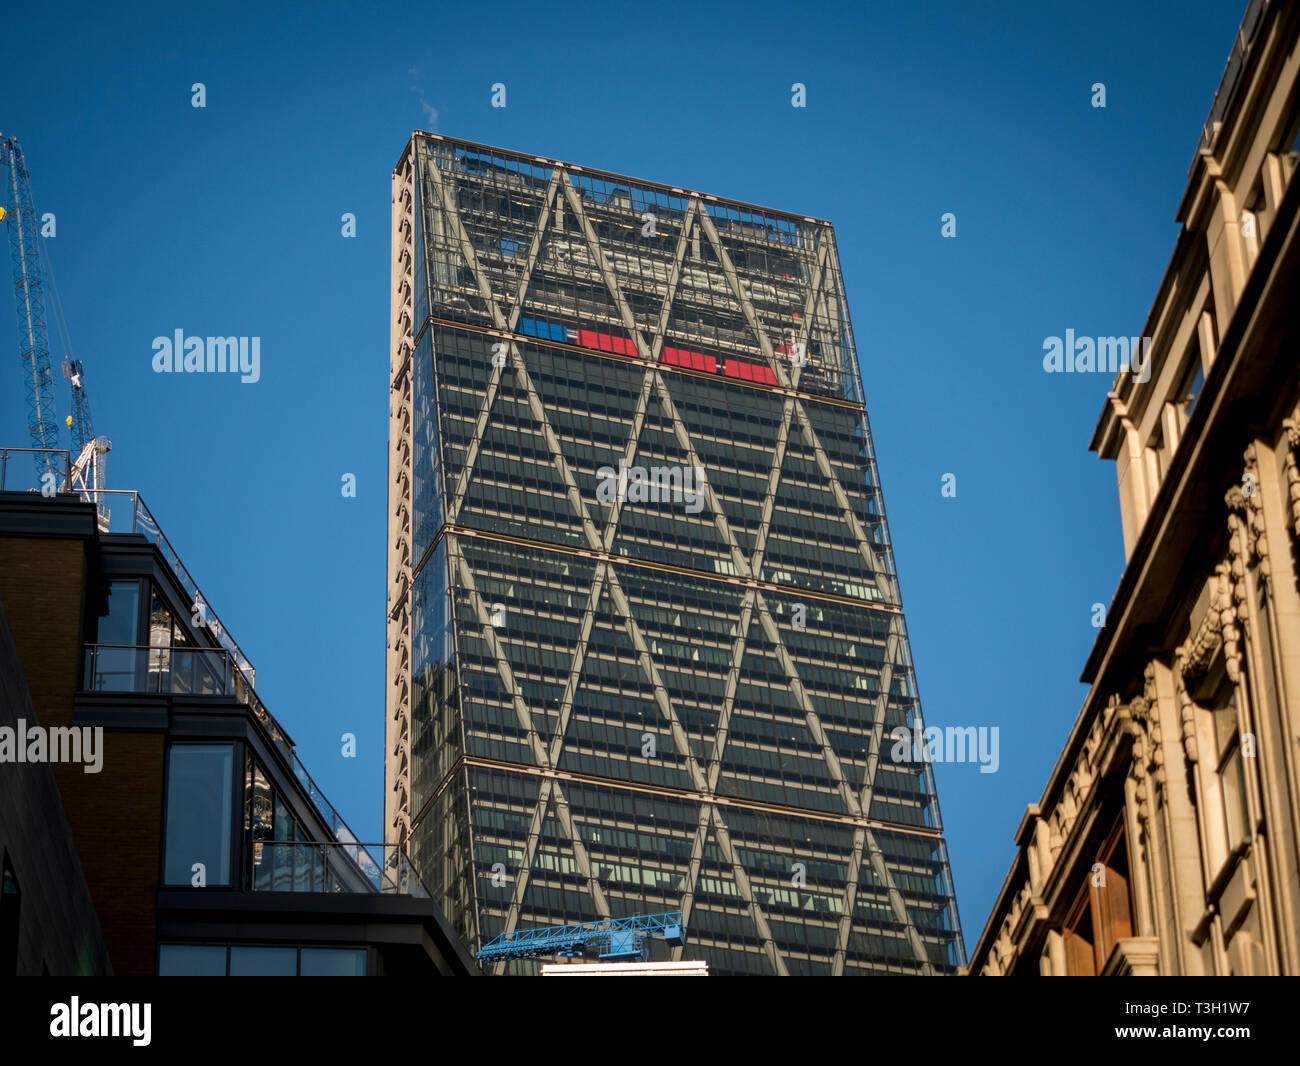 The Cheese Grater or The Leadenhall building in London's Financial district, The Building was designed by Rogers Stirk Harbour and completed in 2014 Stock Photo